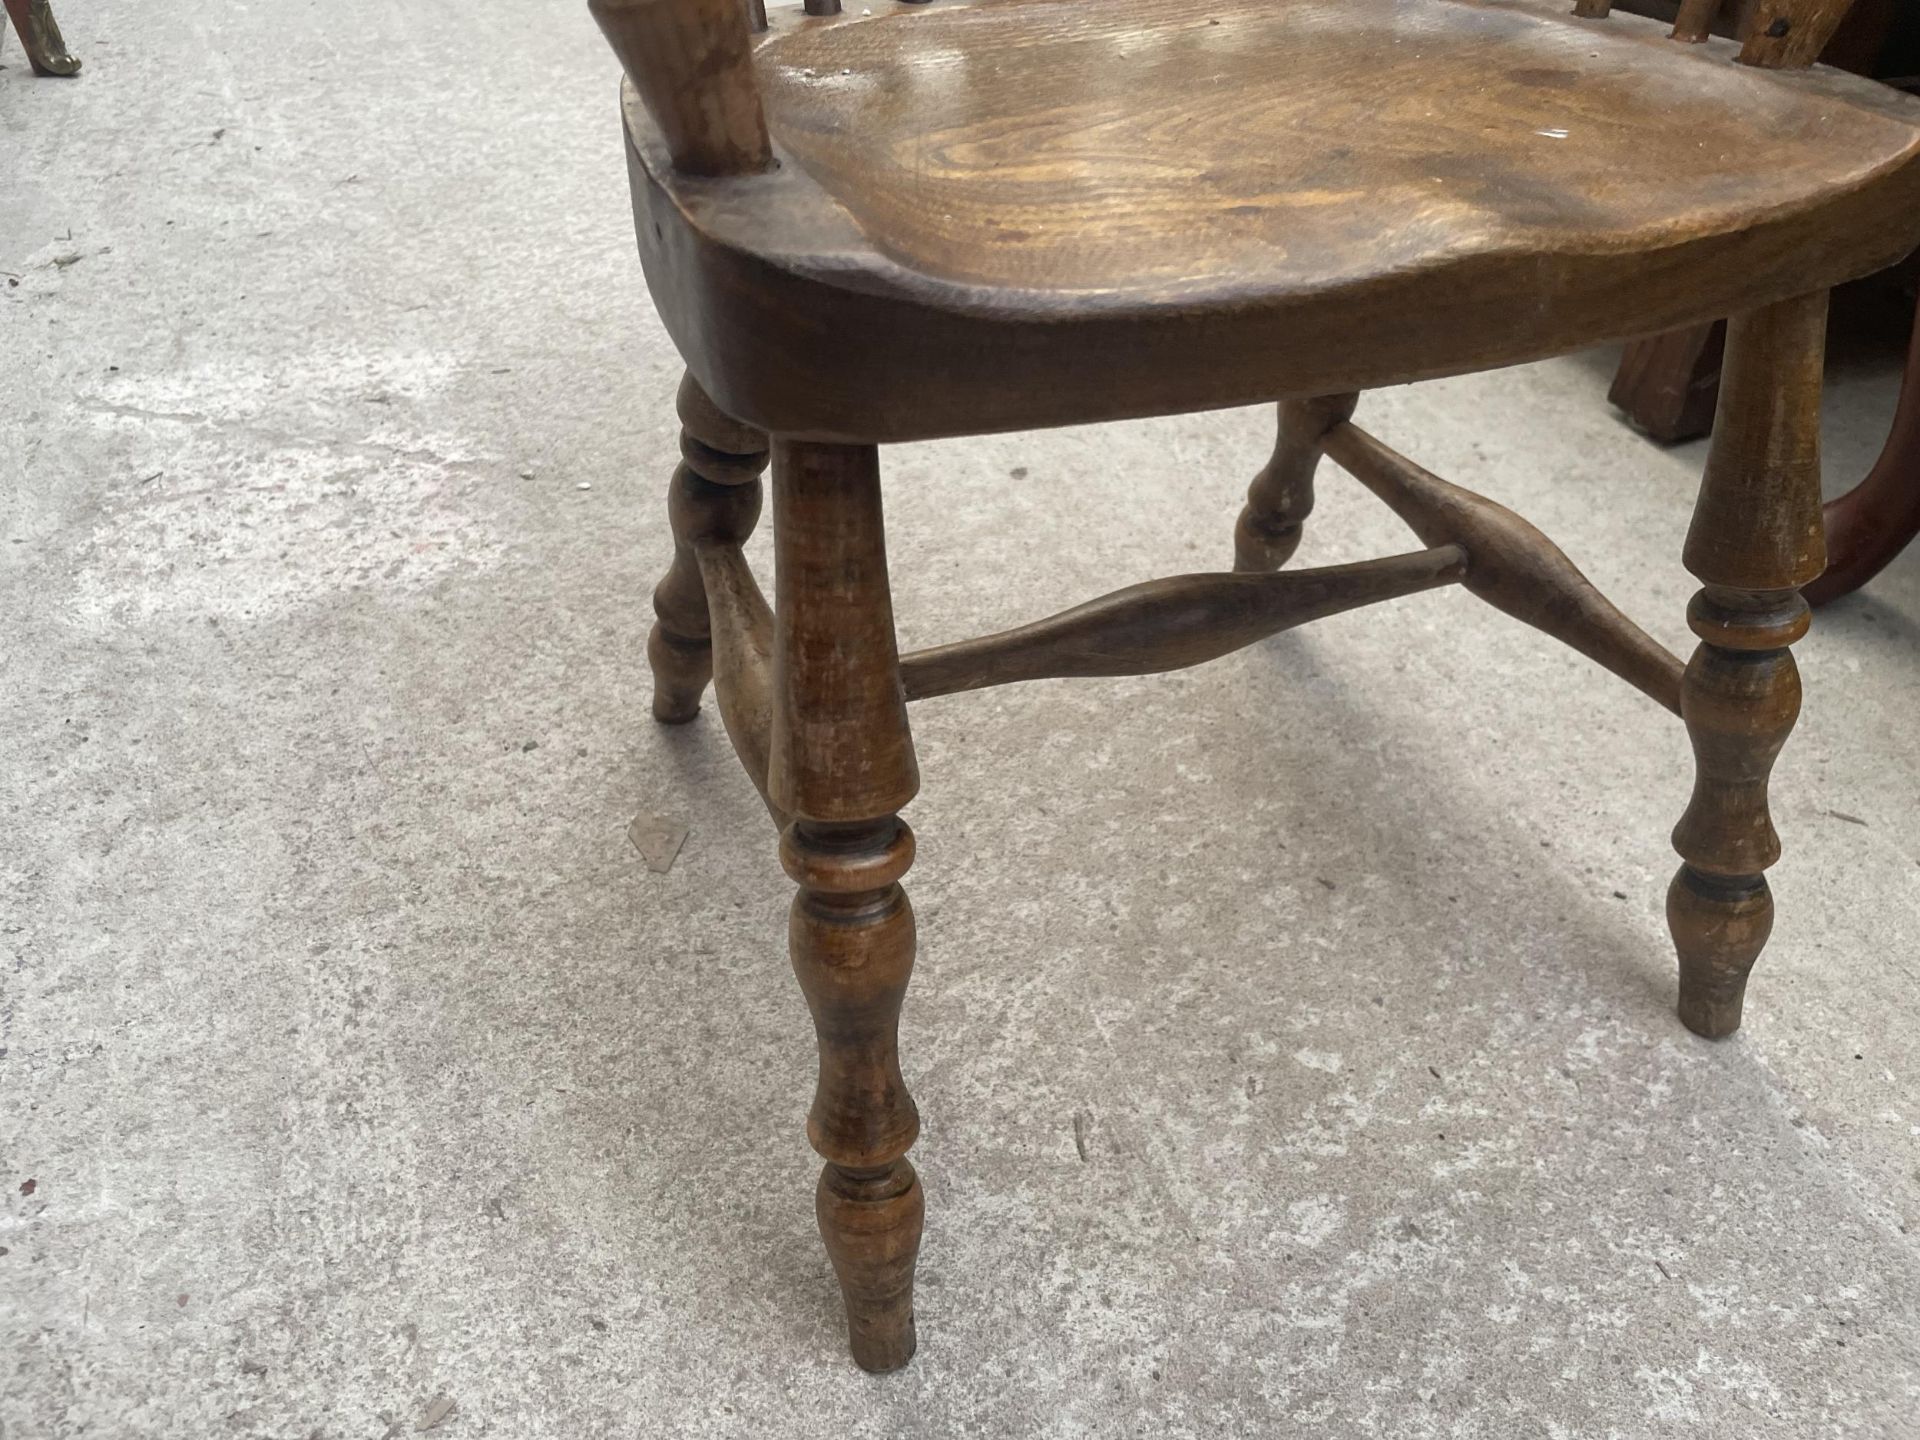 AN 18TH CENTURY STYLE BEECH WINDSOR STYLE CHILDS CHAIR - Image 4 of 4